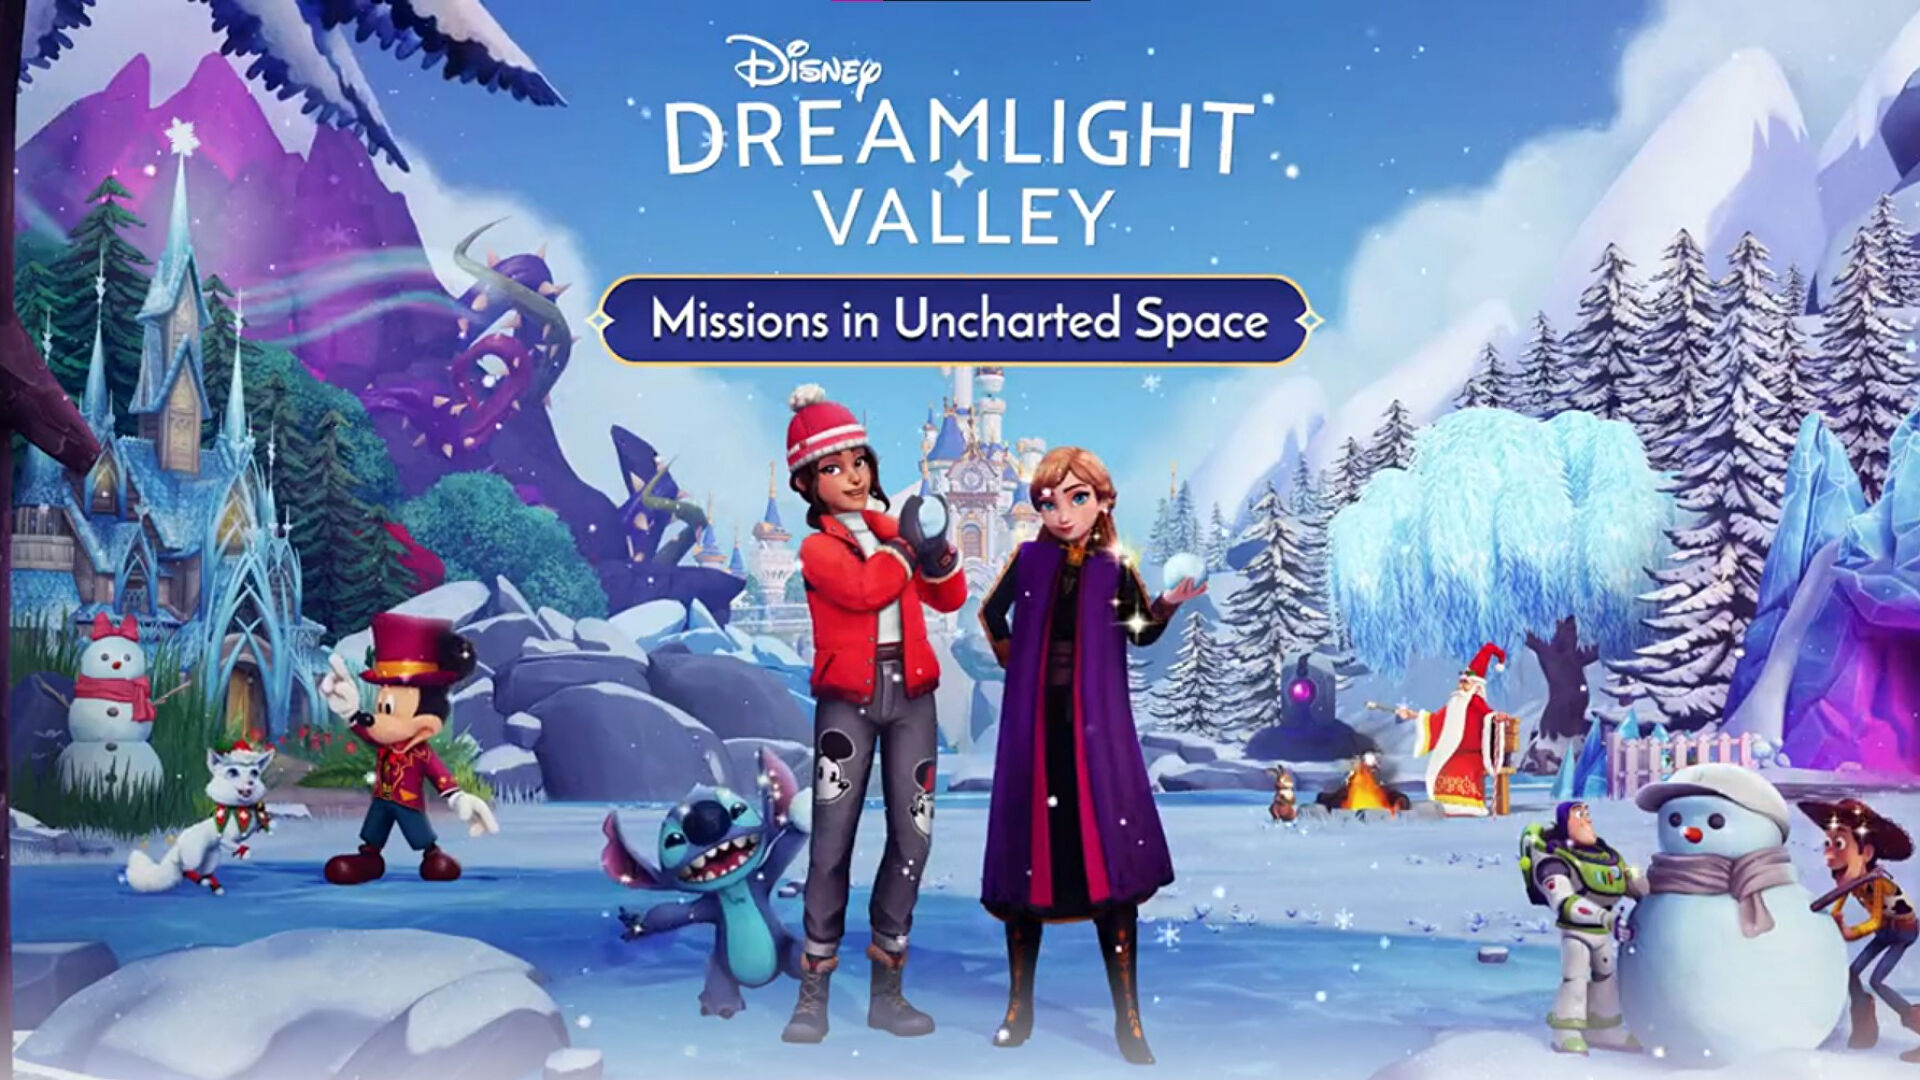 Stitch teased in latest Disney Dreamlight Valley promo